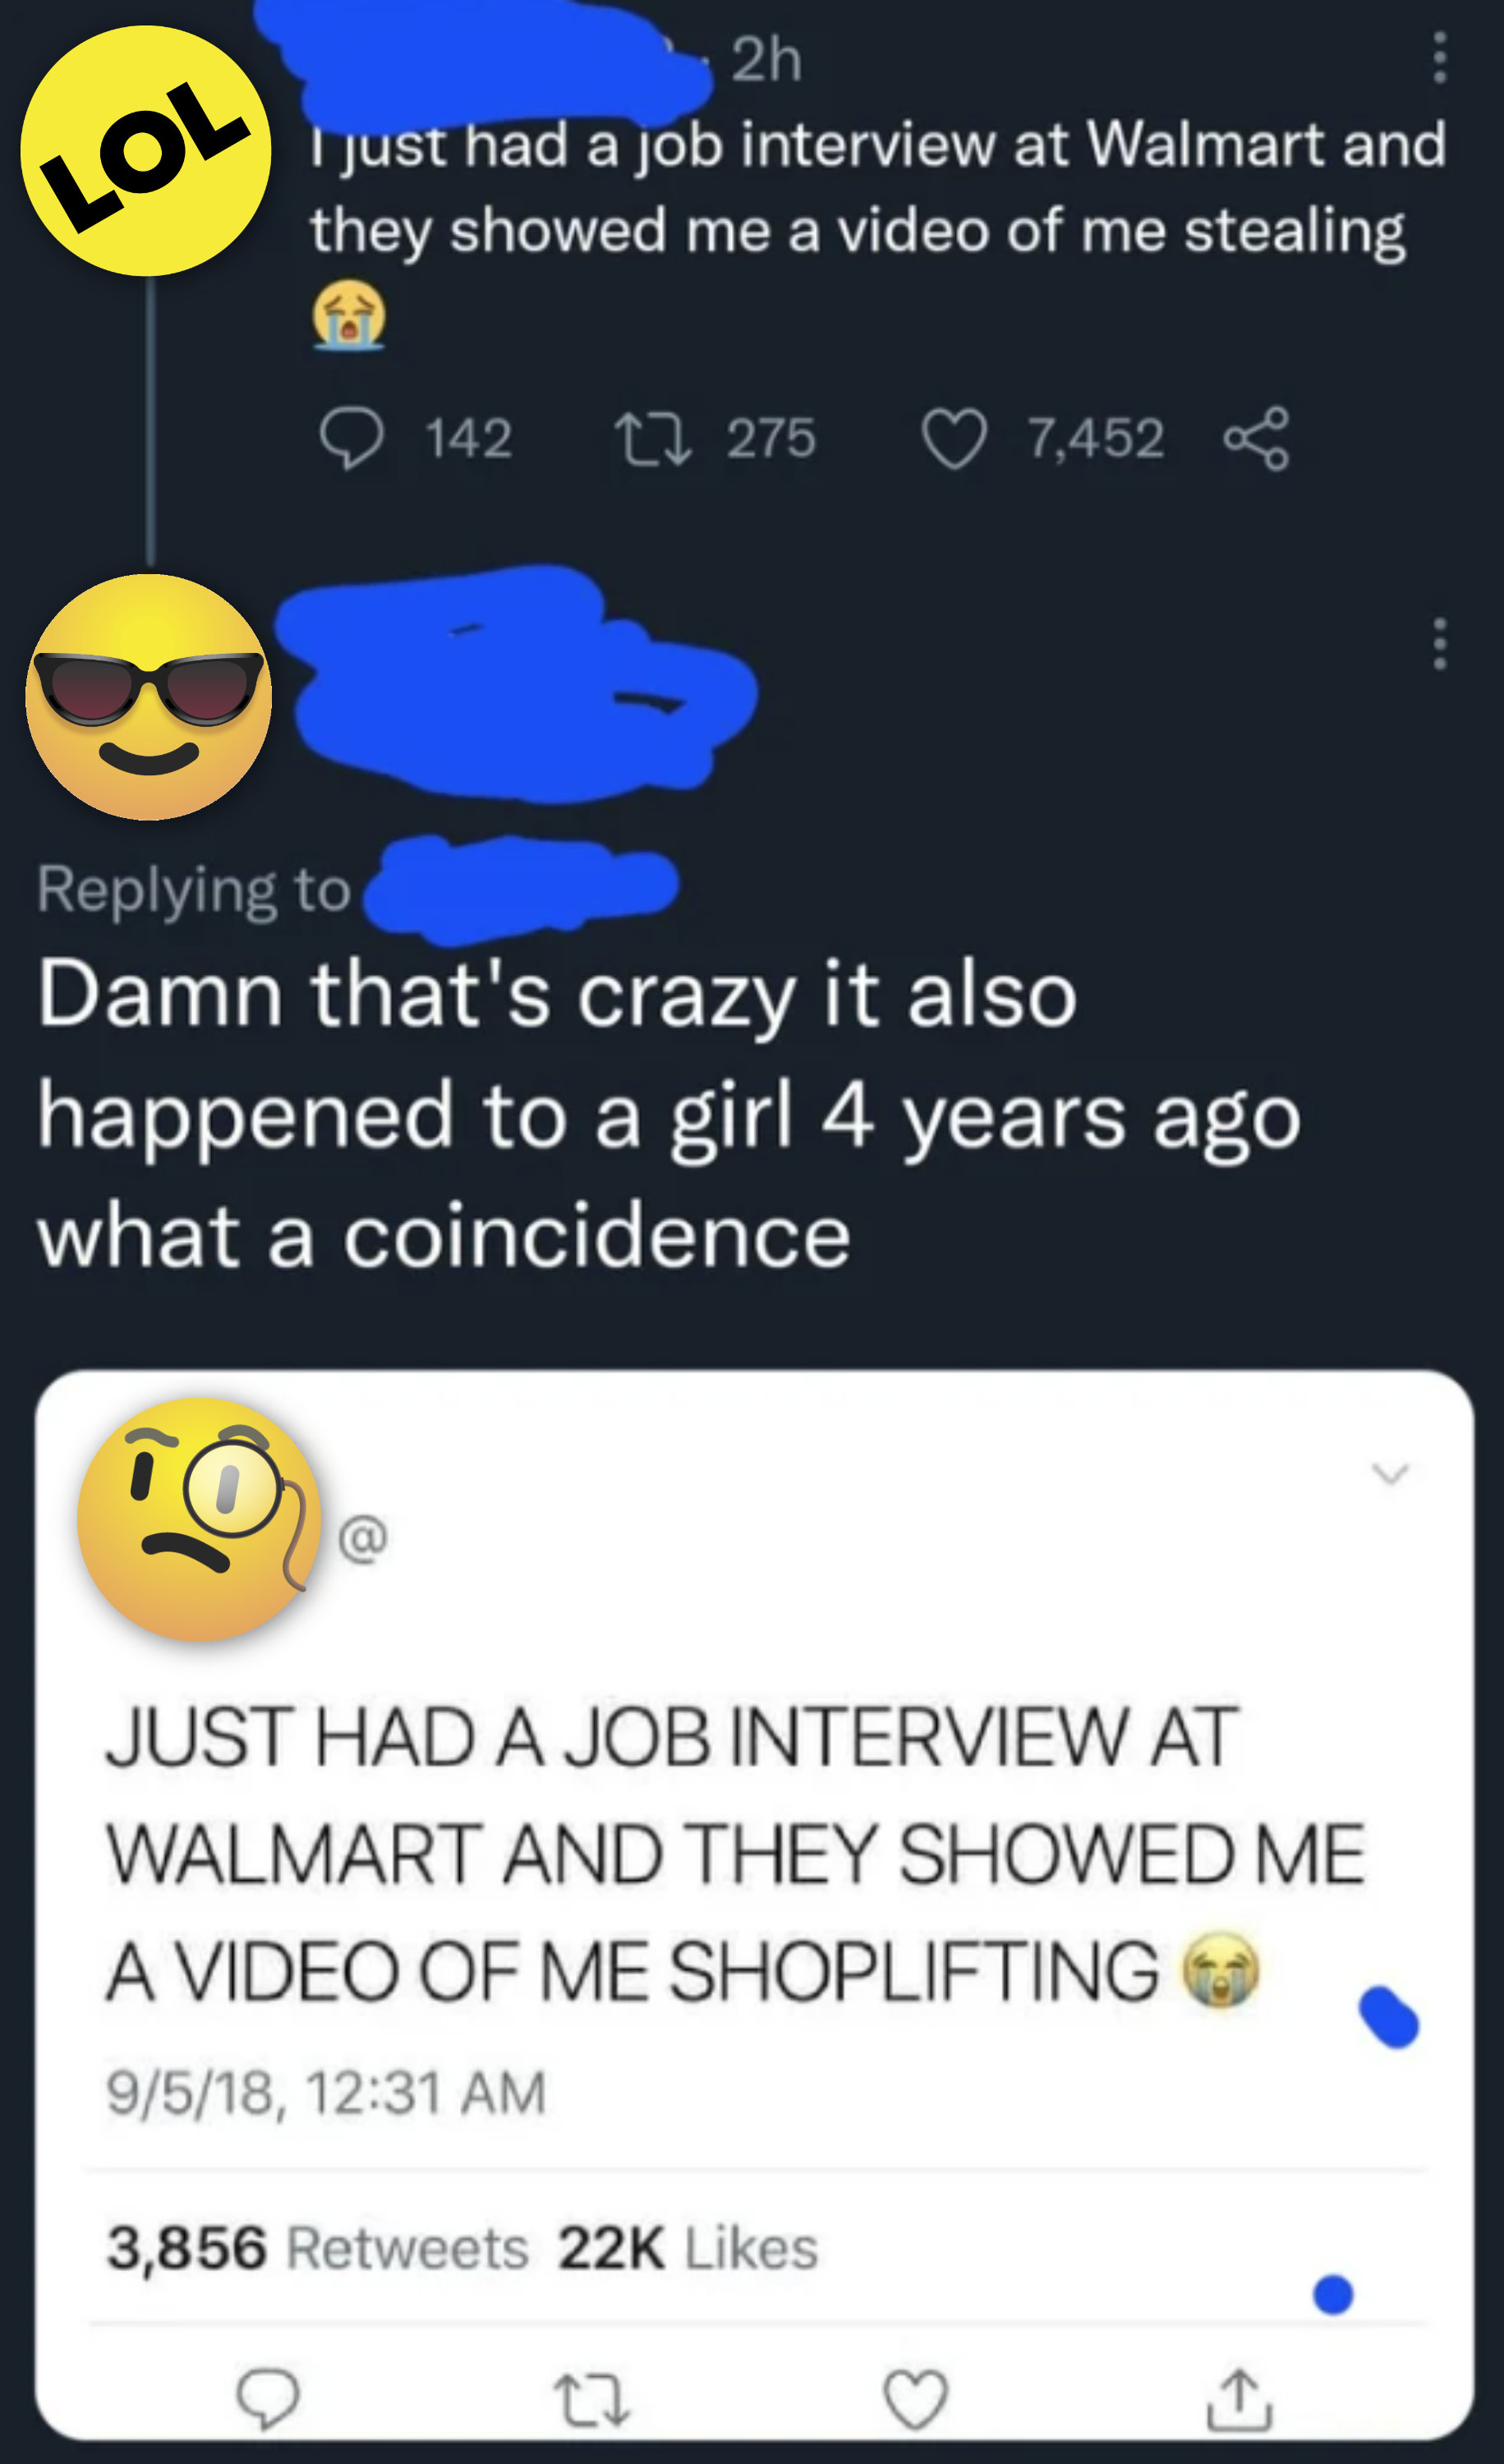 Social media exchange from someone saying, &quot;Just had a job interview at Walmart and they showed me a video of me shoplifting.&quot;